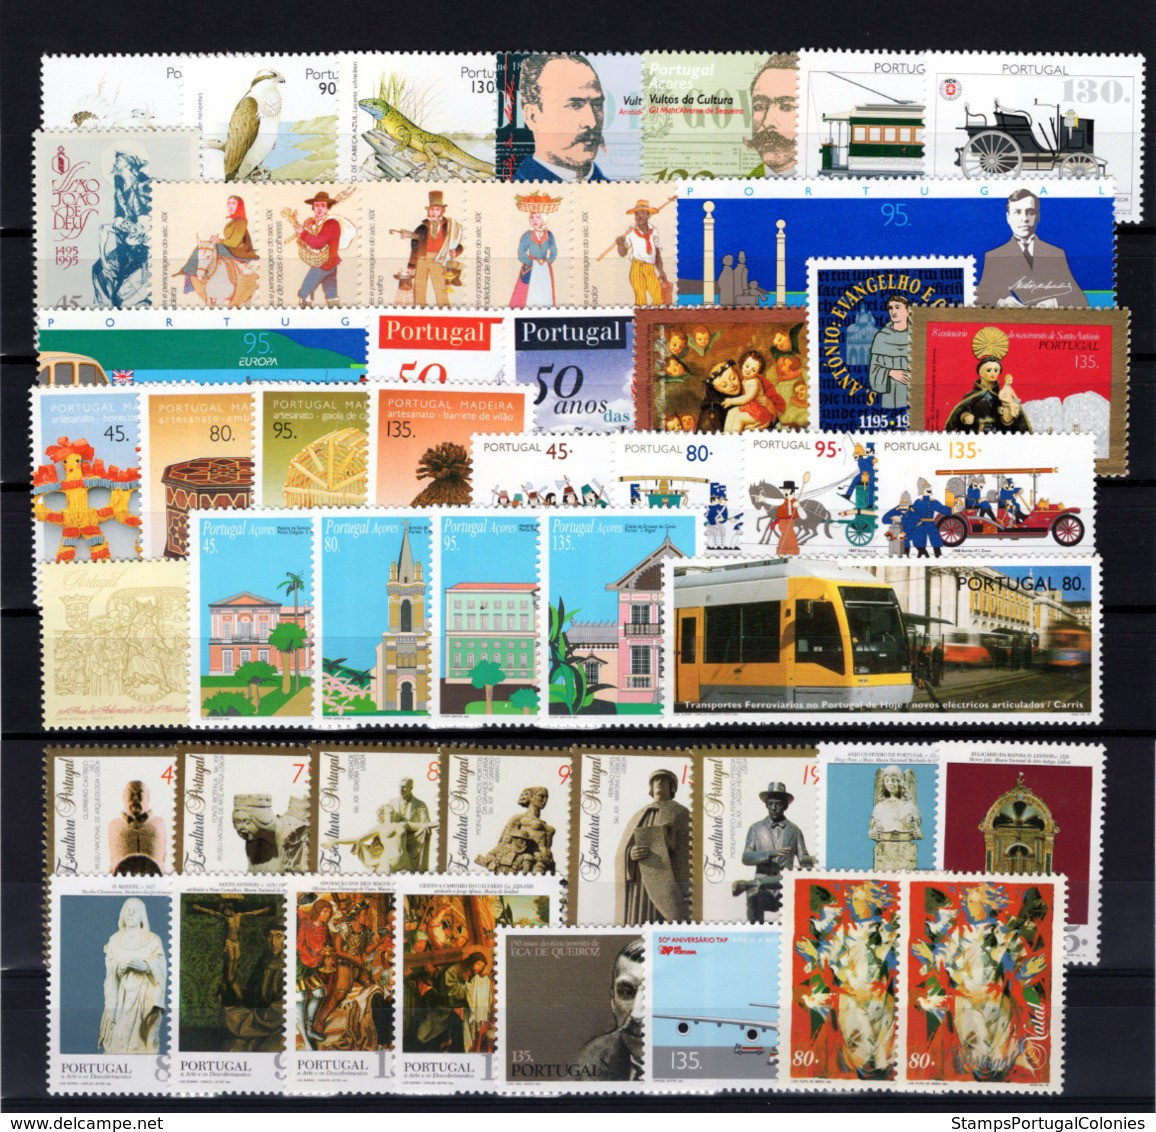 1995 Portugal Azores Madeira Complete Year MNH Stamps. Année Compléte NeufSansCharnière. Ano Completo Novo Sem Charneira - Volledig Jaar